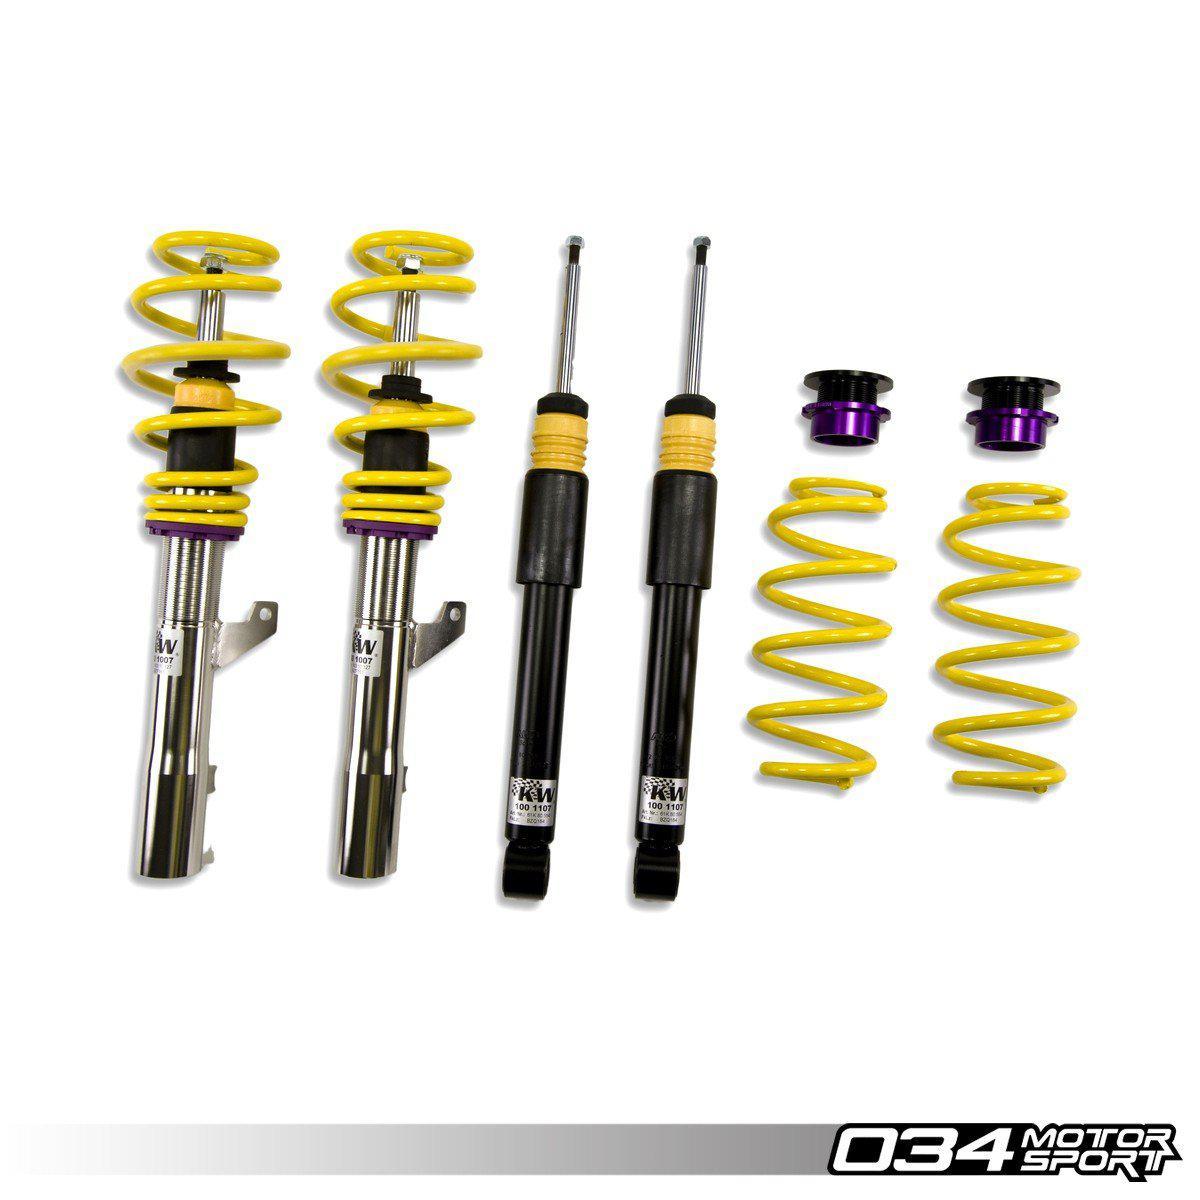 KW Variant 3 Coilover Suspension, C5 Audi RS6 4.2t Quattro-A Little Tuning Co